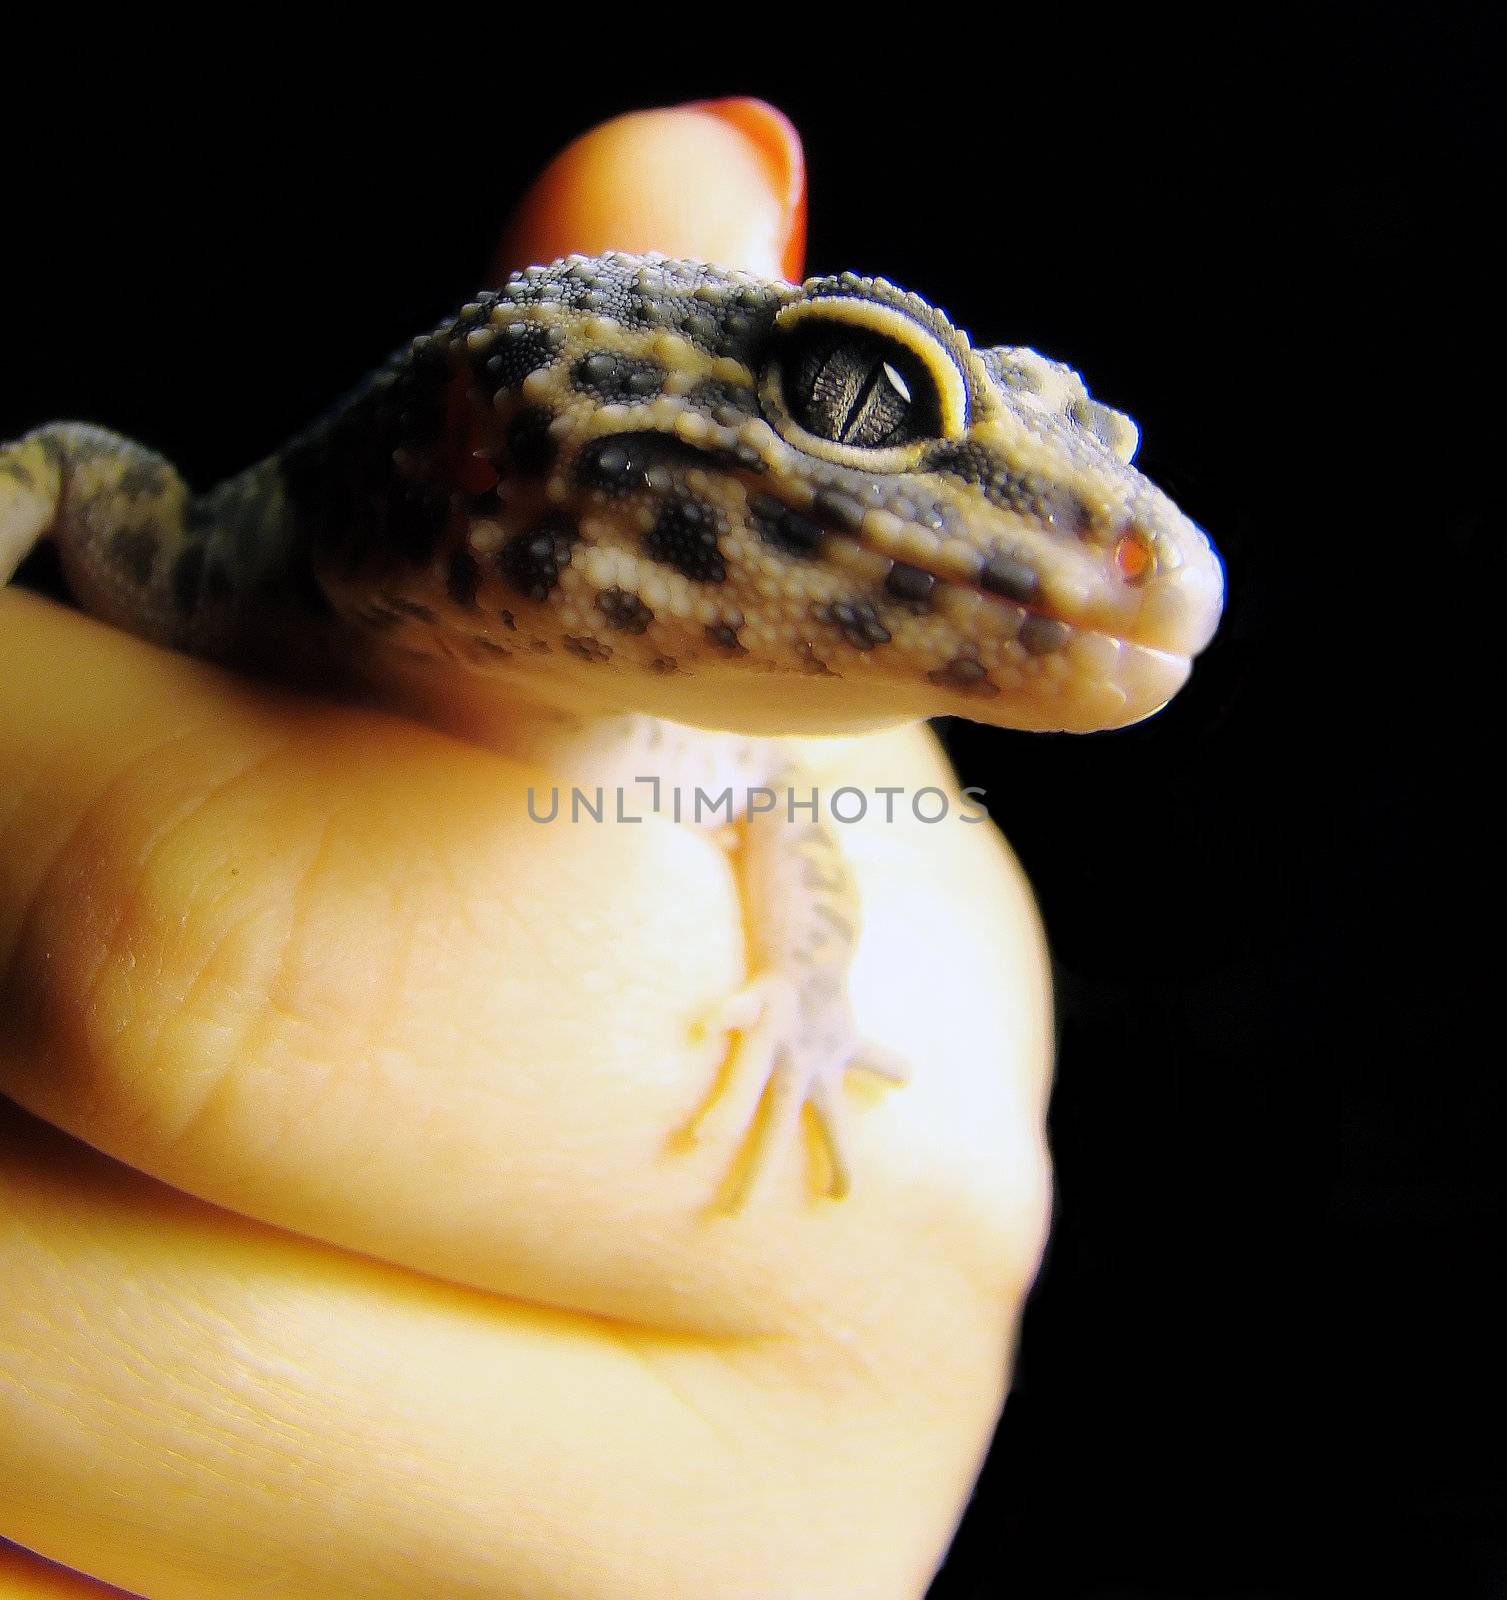 a healthy adult male leopard gecko being held